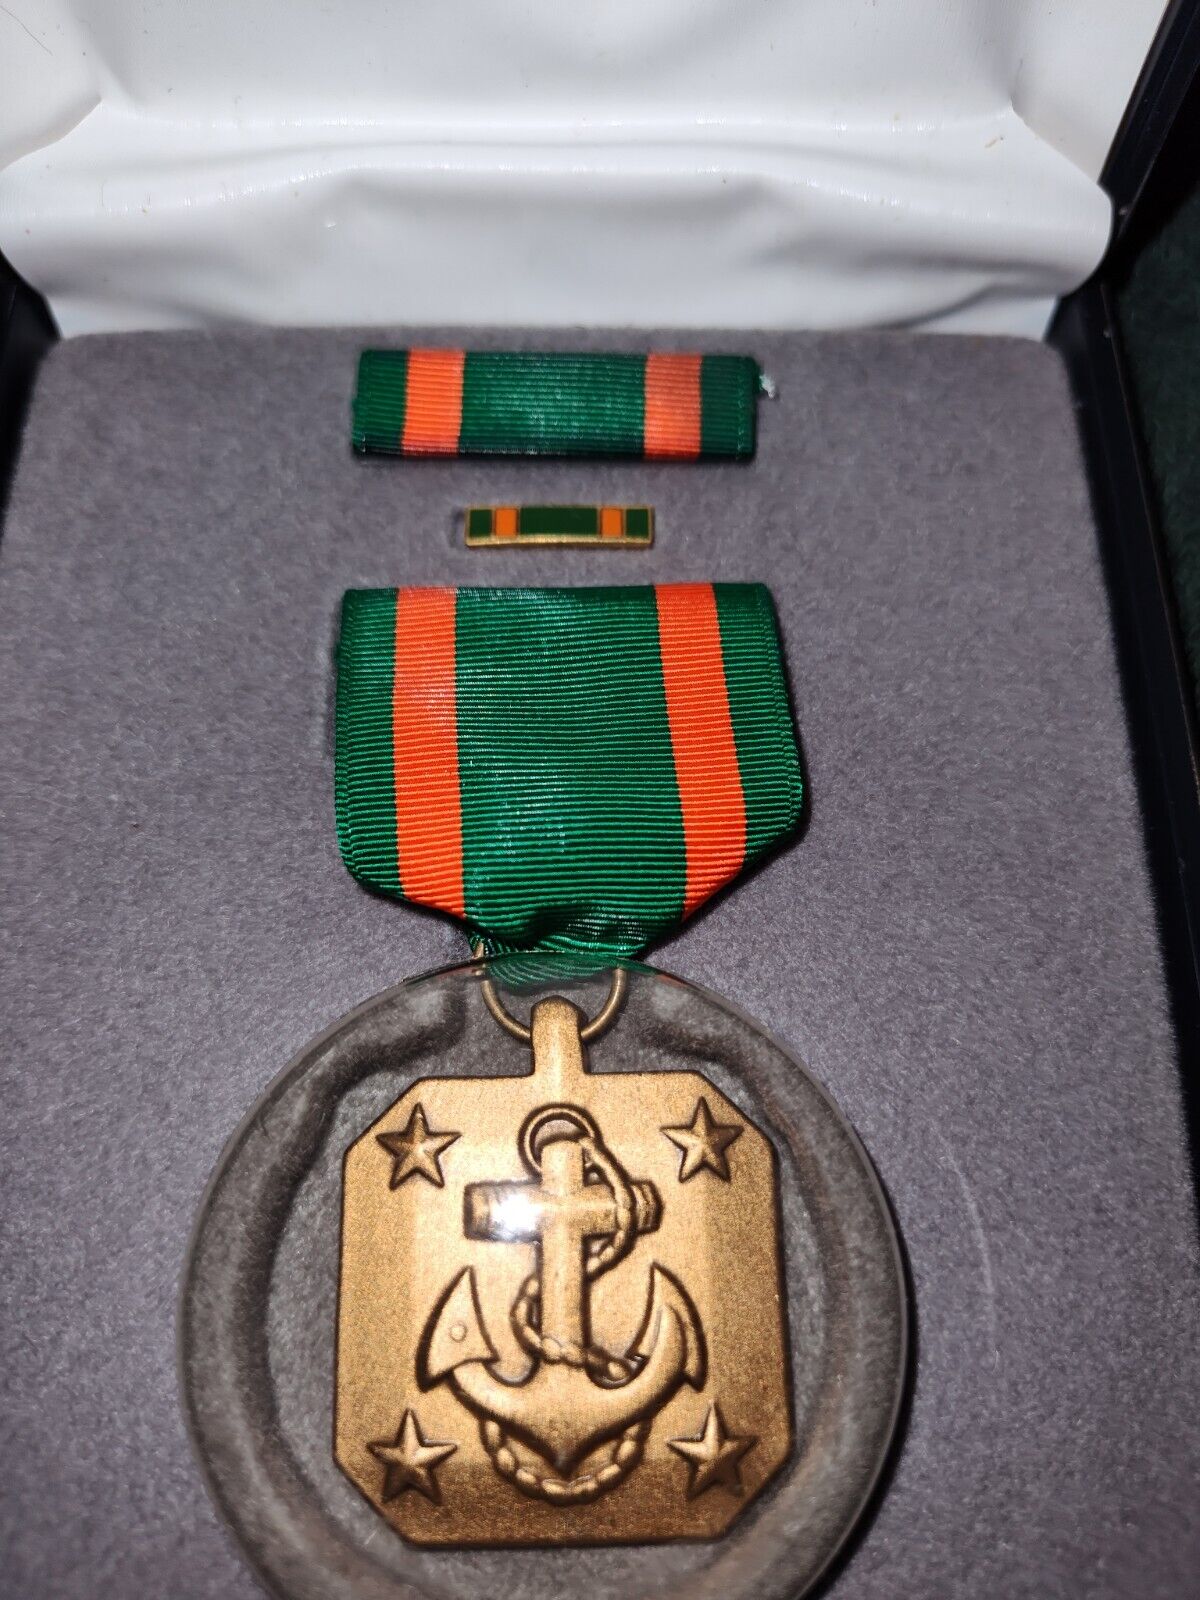 USMC Marine Corps And Navy Achievement Medal With Ribbon Bar